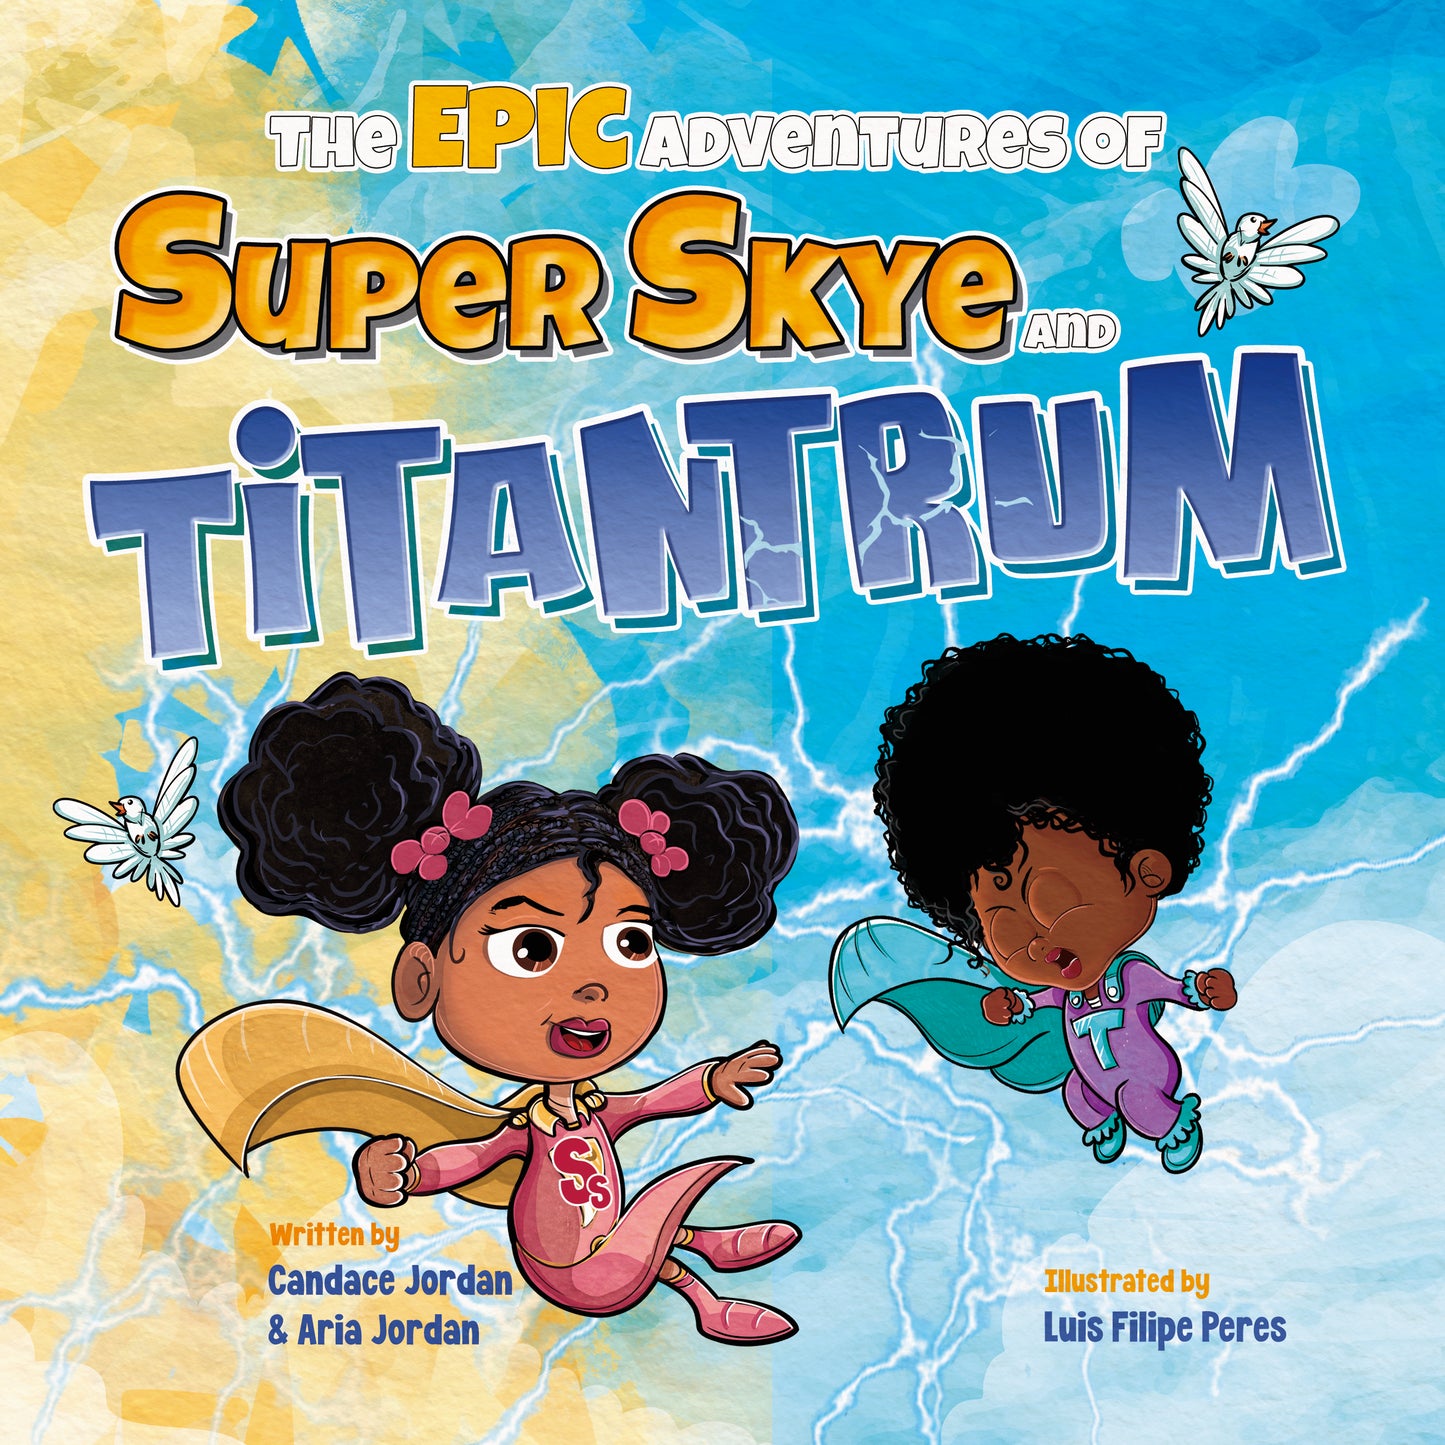 THE EPIC ADVENTURES OF SUPER SKYE AND TITANTRUM by Candace and Aria Jordan